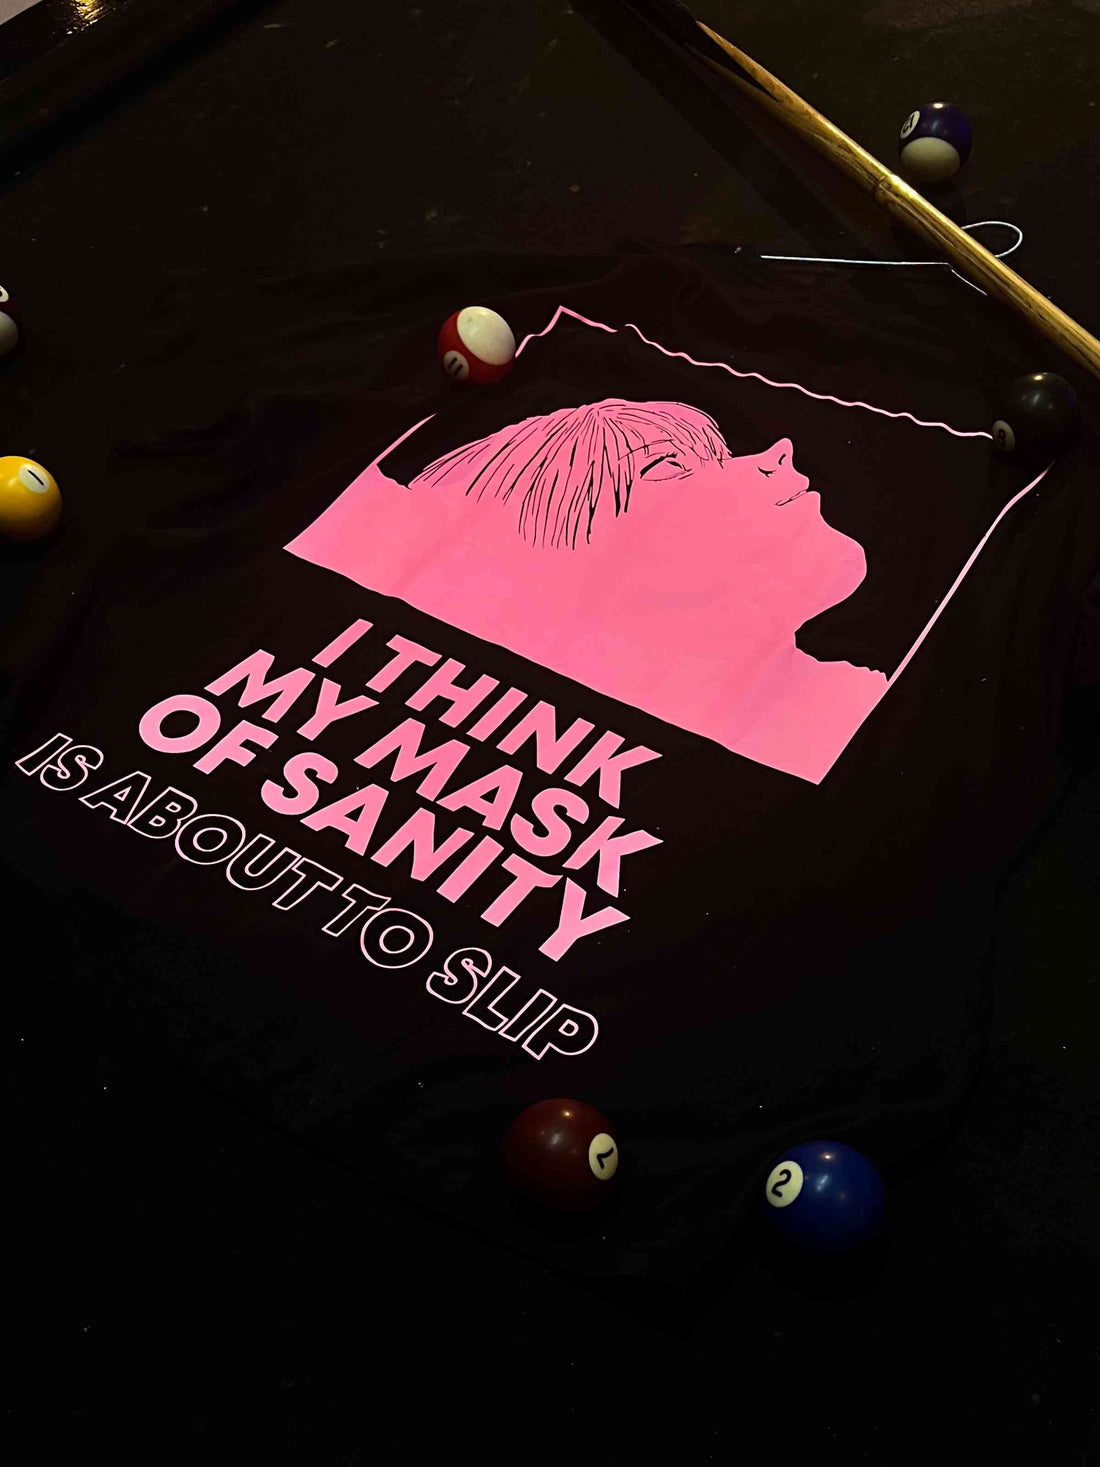 Mask Of Sanity (Pink Glow) Drop-Sleeved Tee   For Men and Women